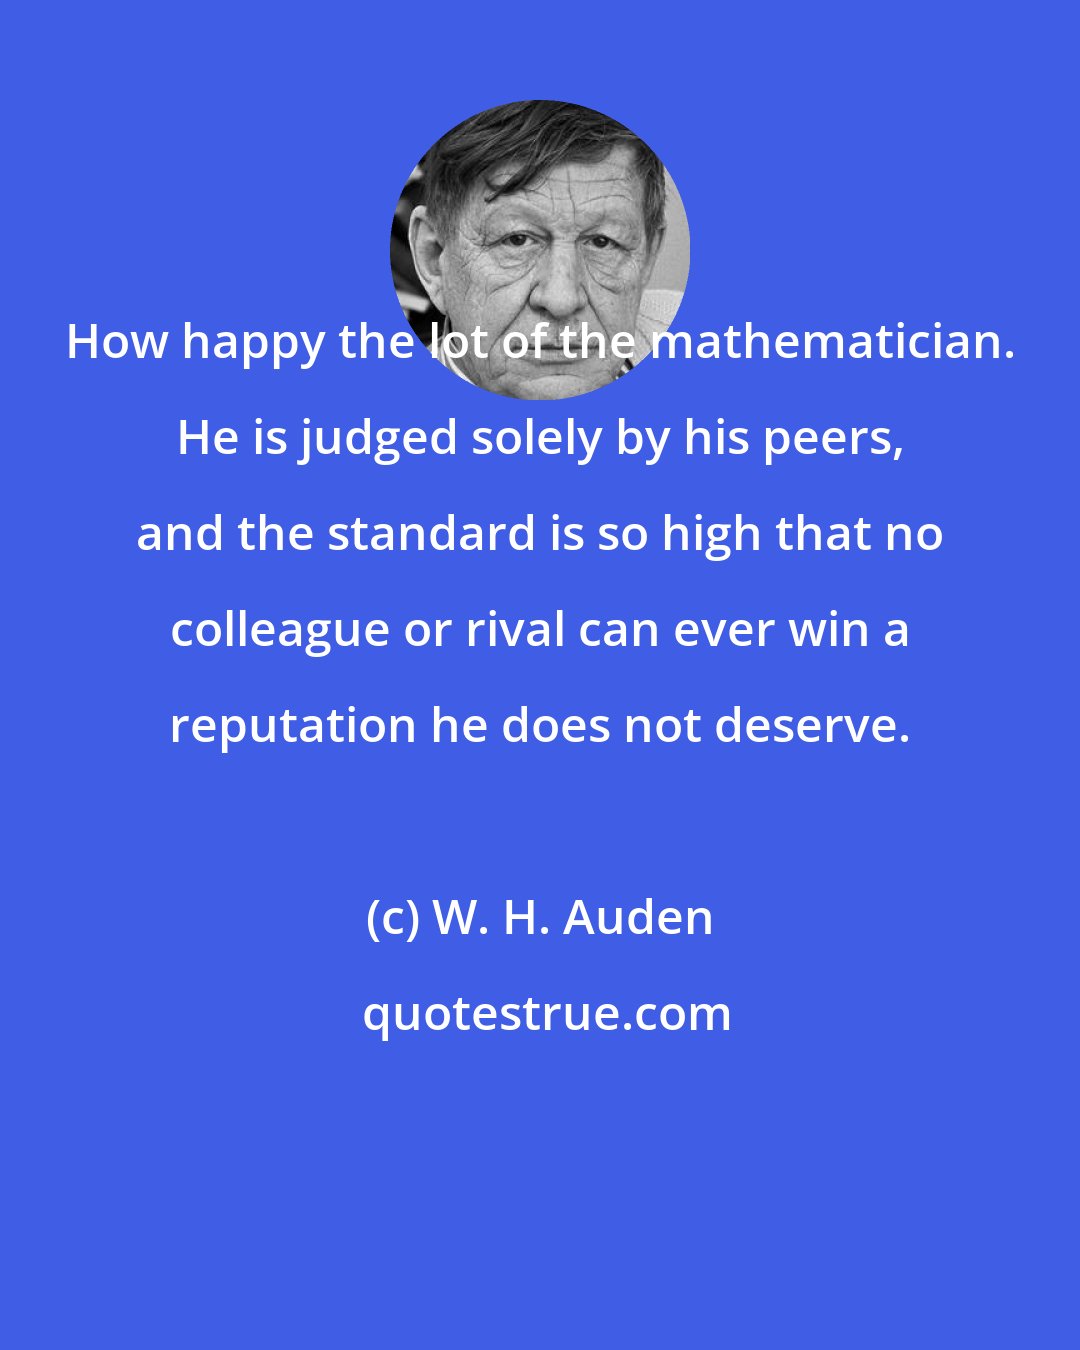 W. H. Auden: How happy the lot of the mathematician. He is judged solely by his peers, and the standard is so high that no colleague or rival can ever win a reputation he does not deserve.